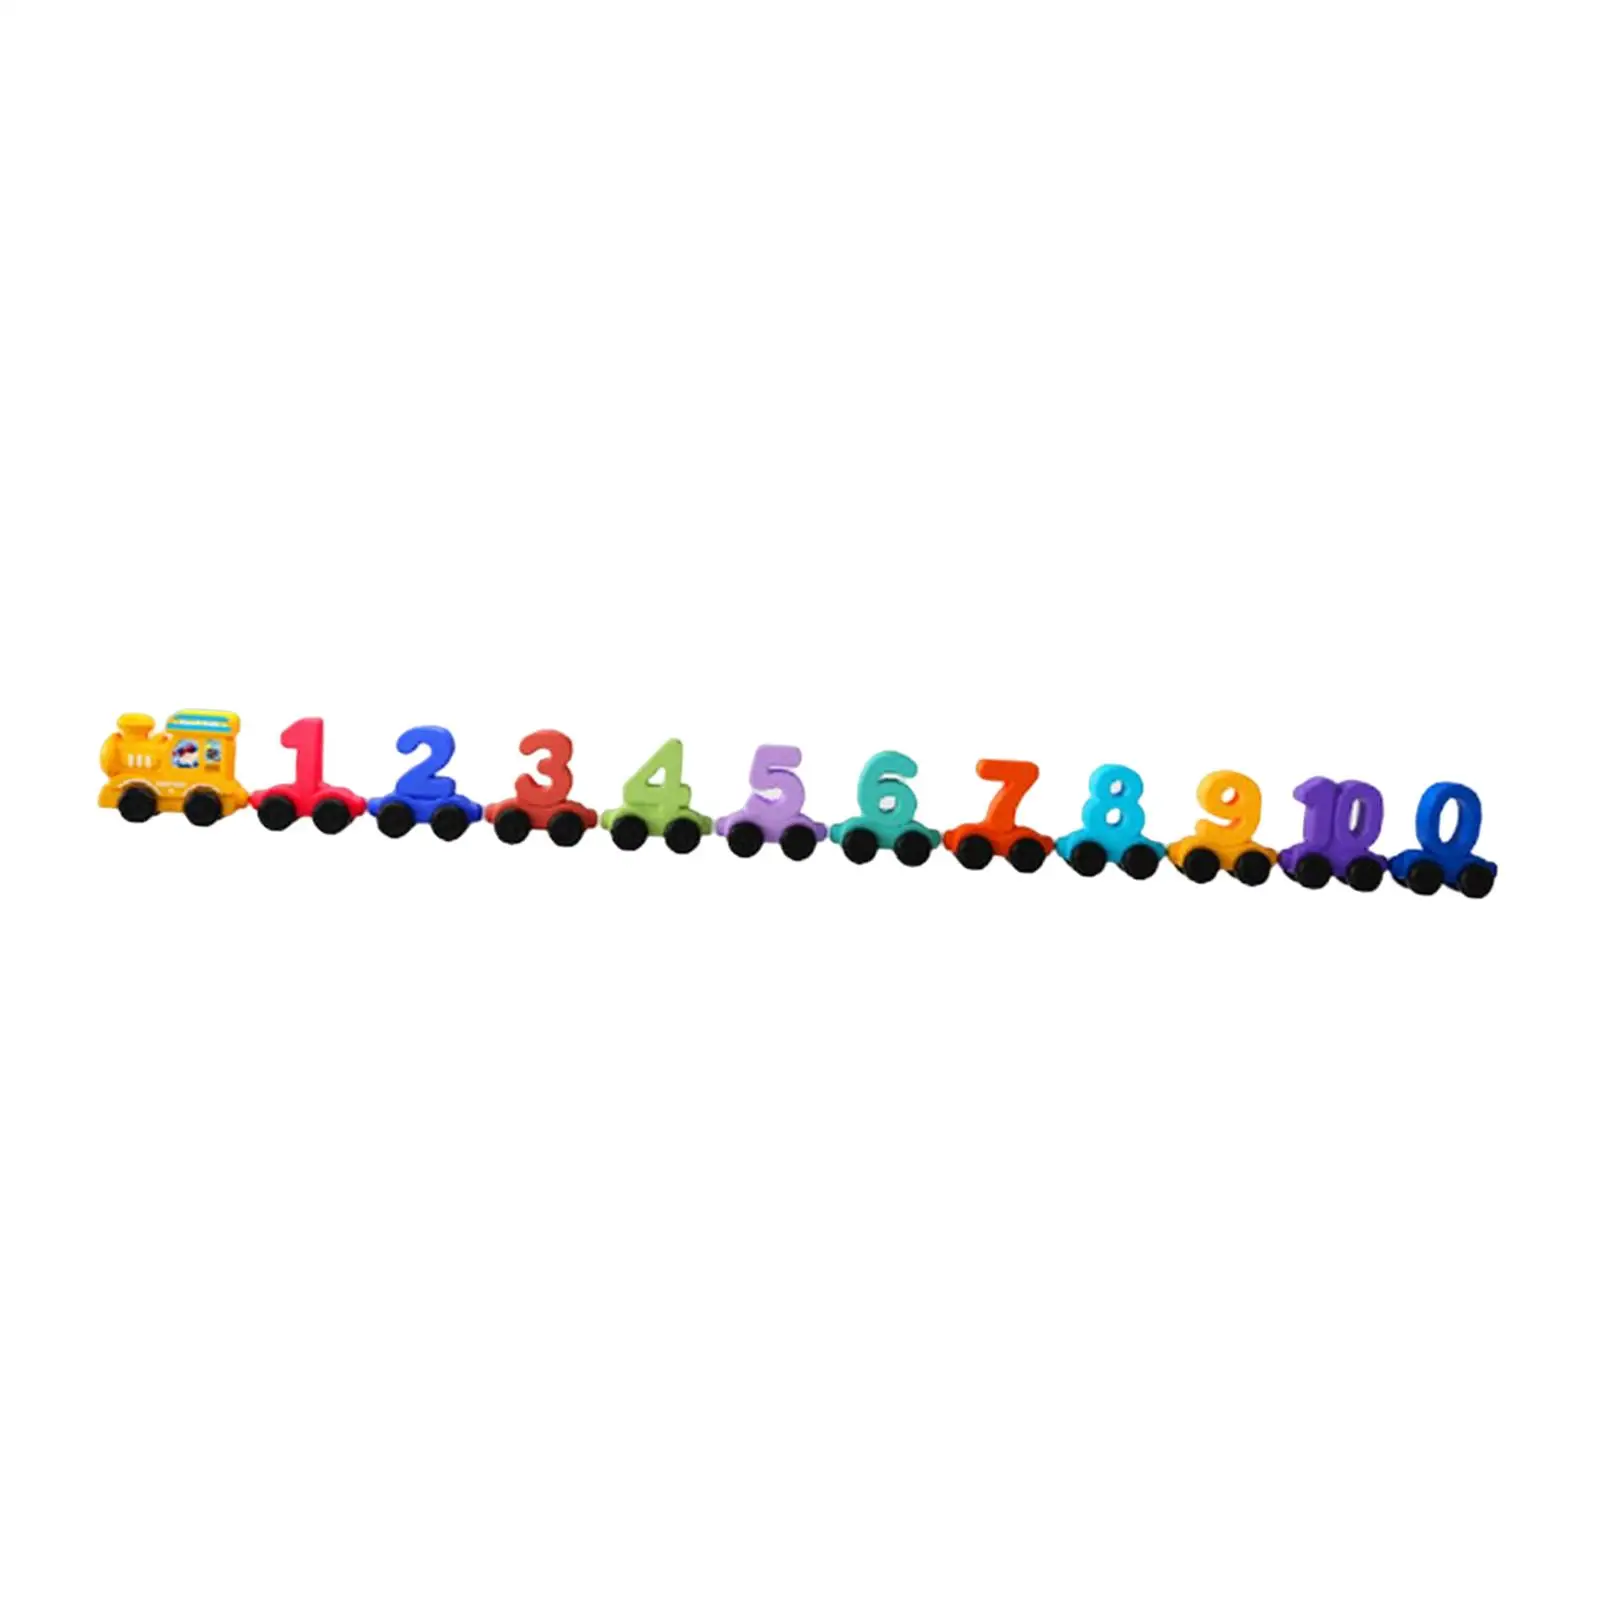 11 Piece Wooden Train Set Durable Colorful Wooden Number Train Set for Game Outdoor